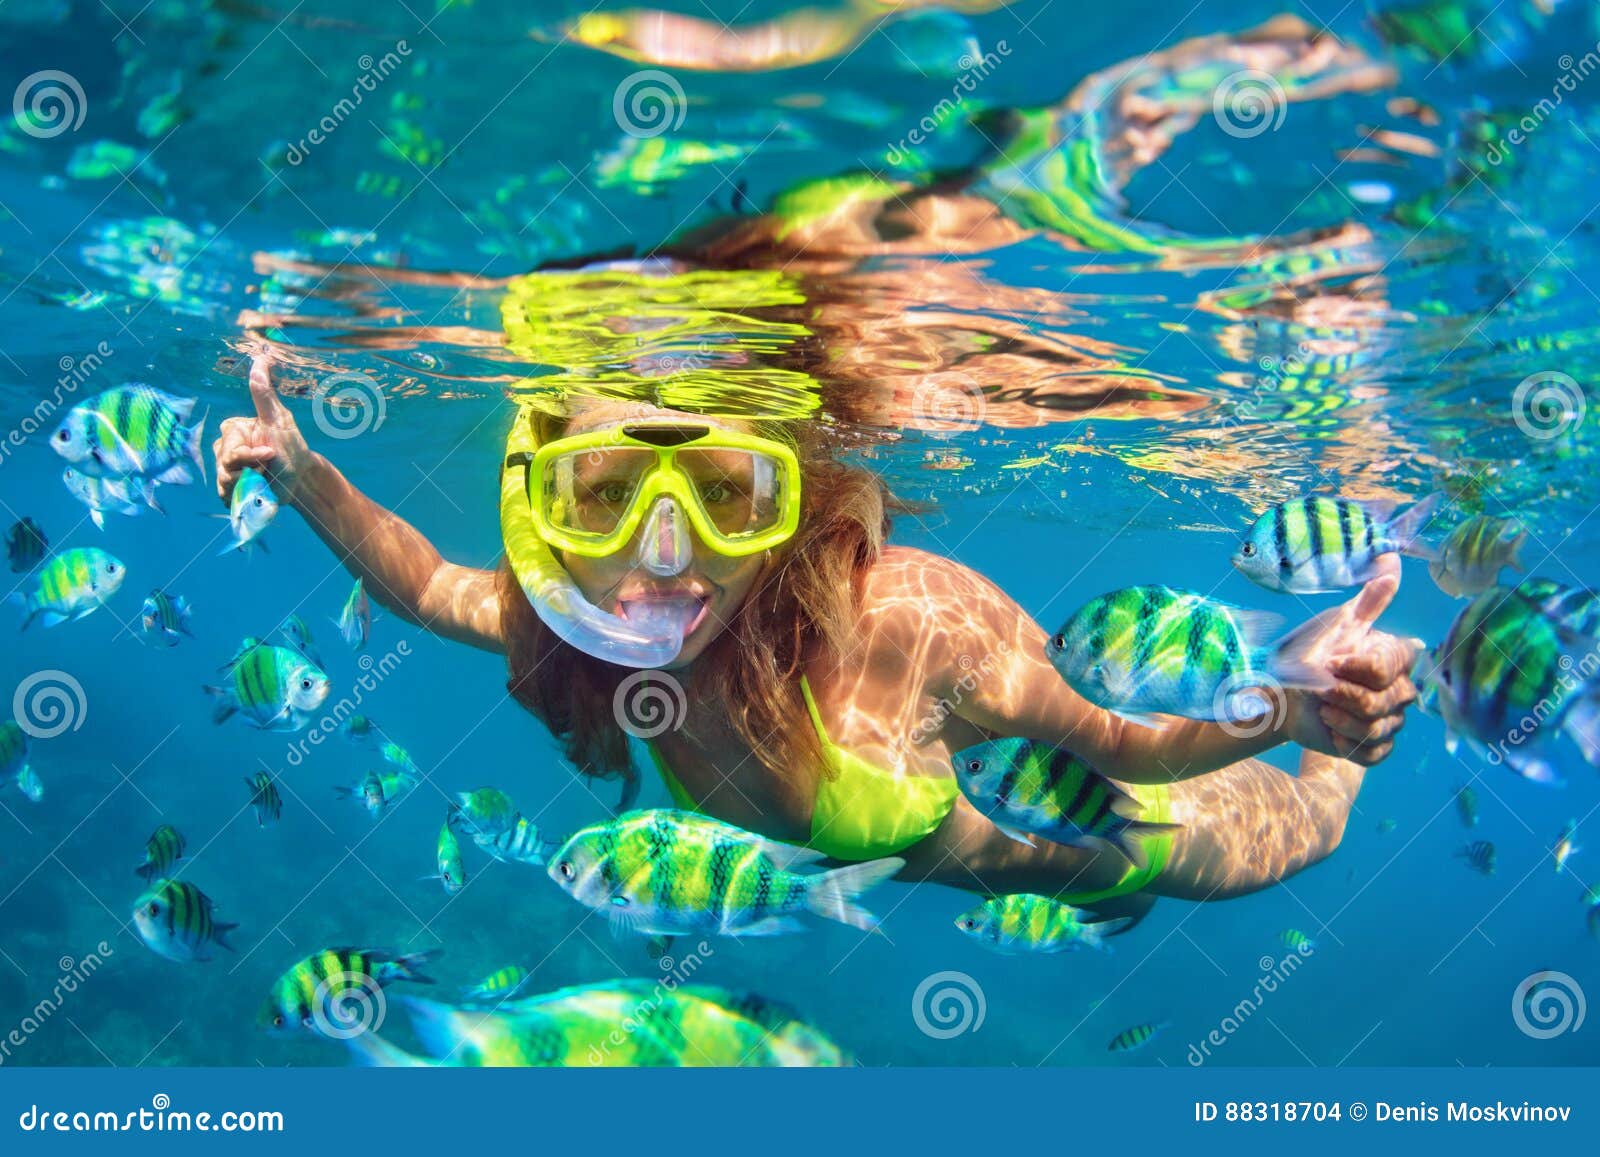 girl in snorkeling mask dive underwater with coral reef fishes